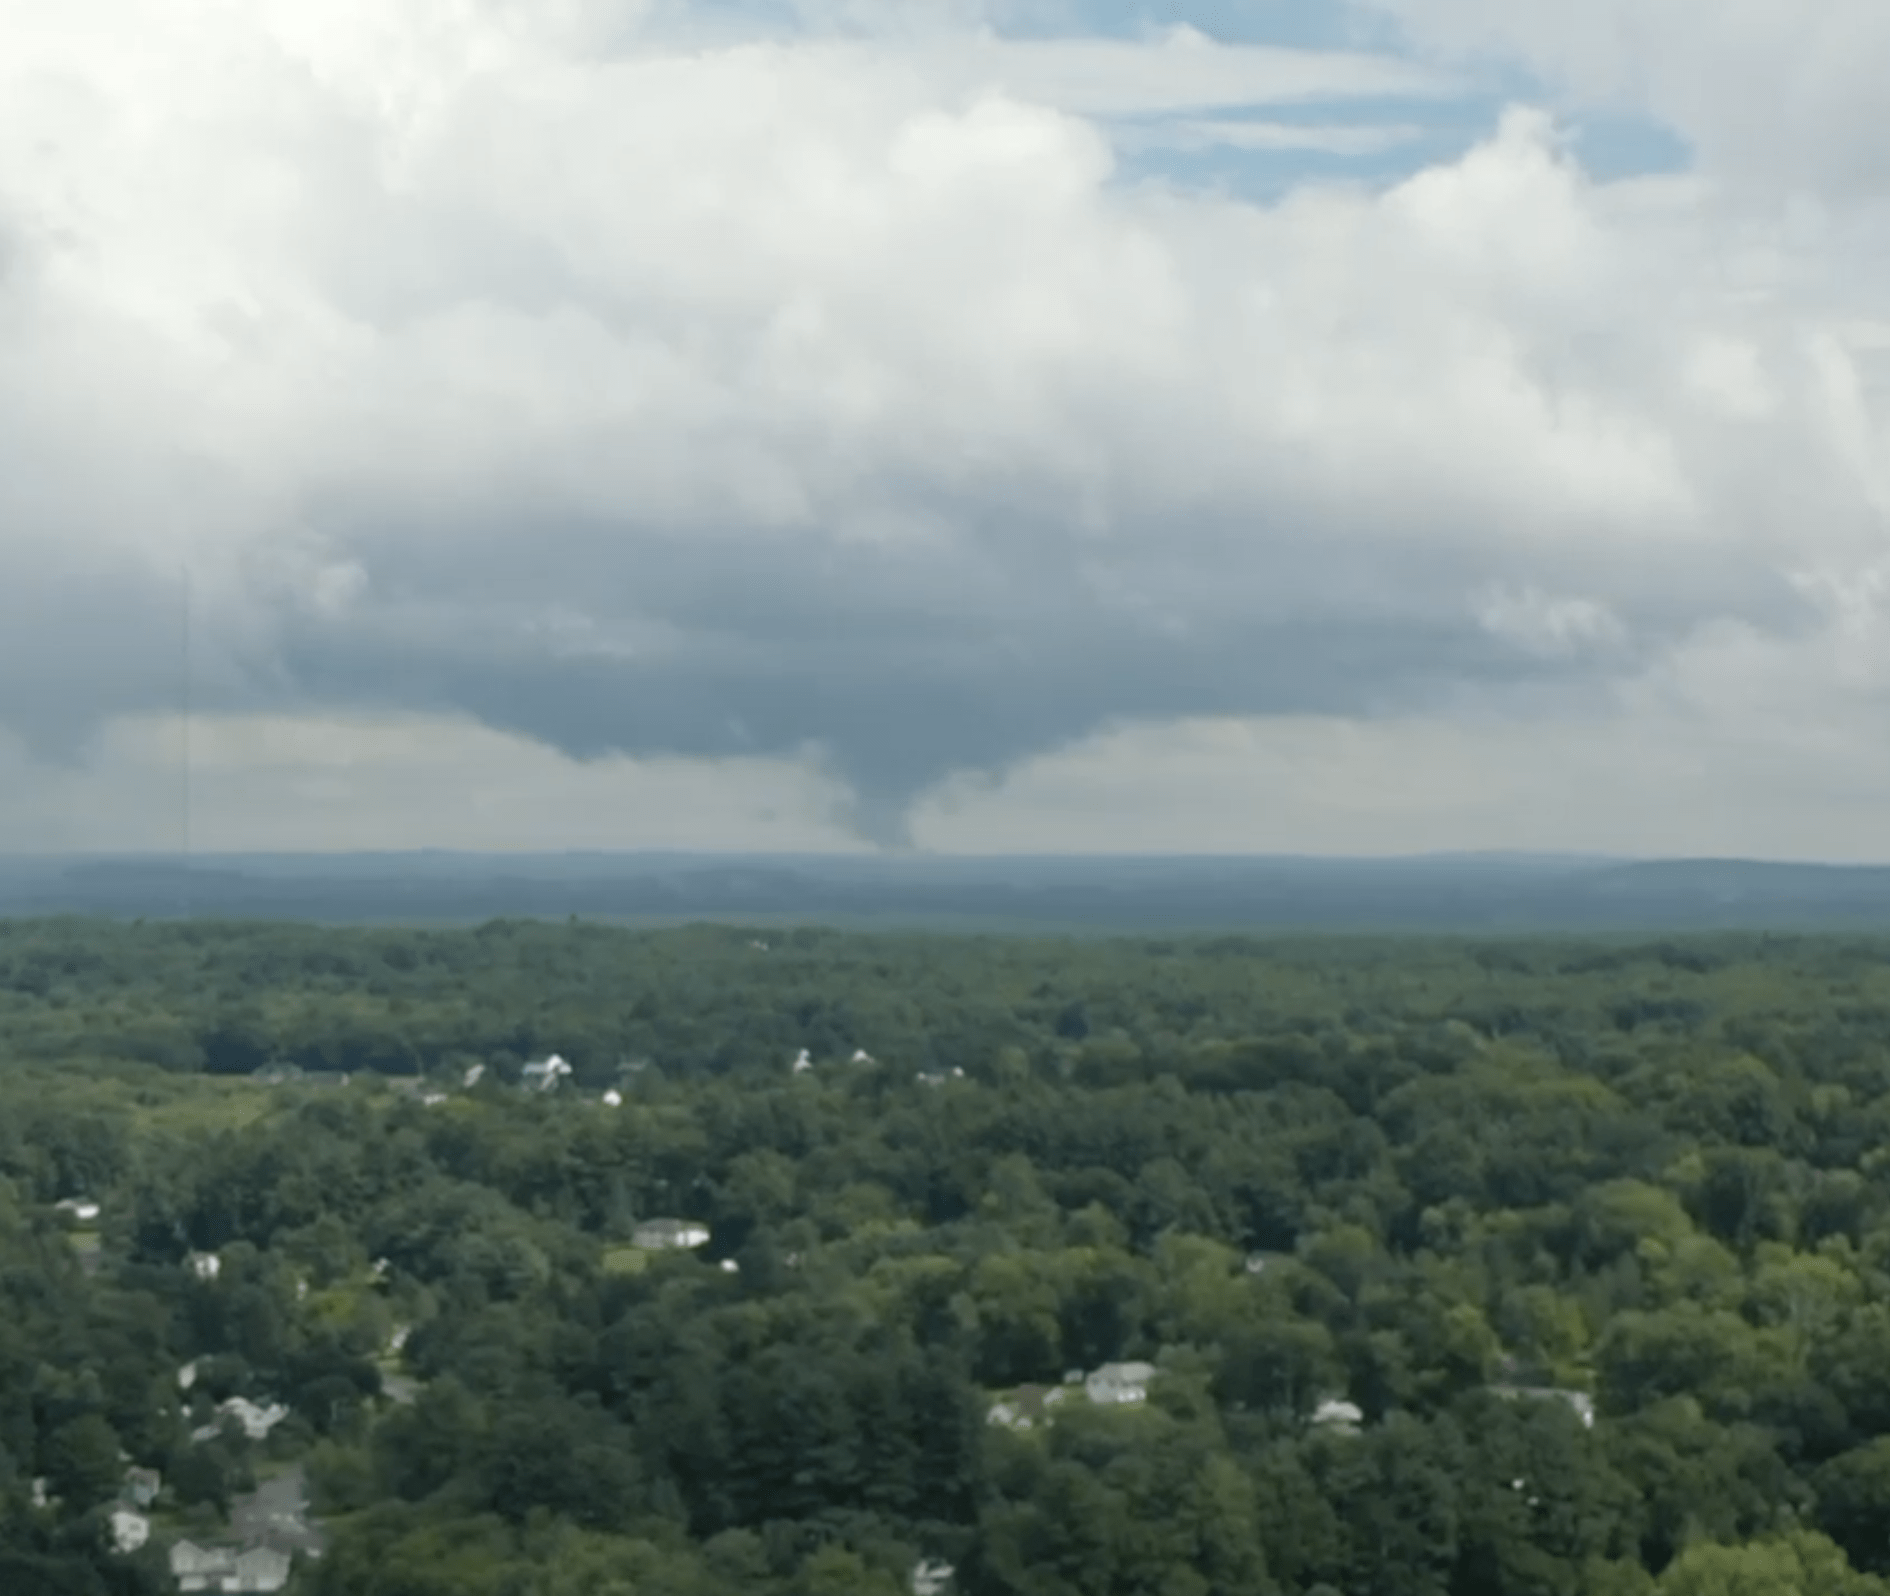 UPDATE: Tornado touched down in Marlborough, NWS confirms